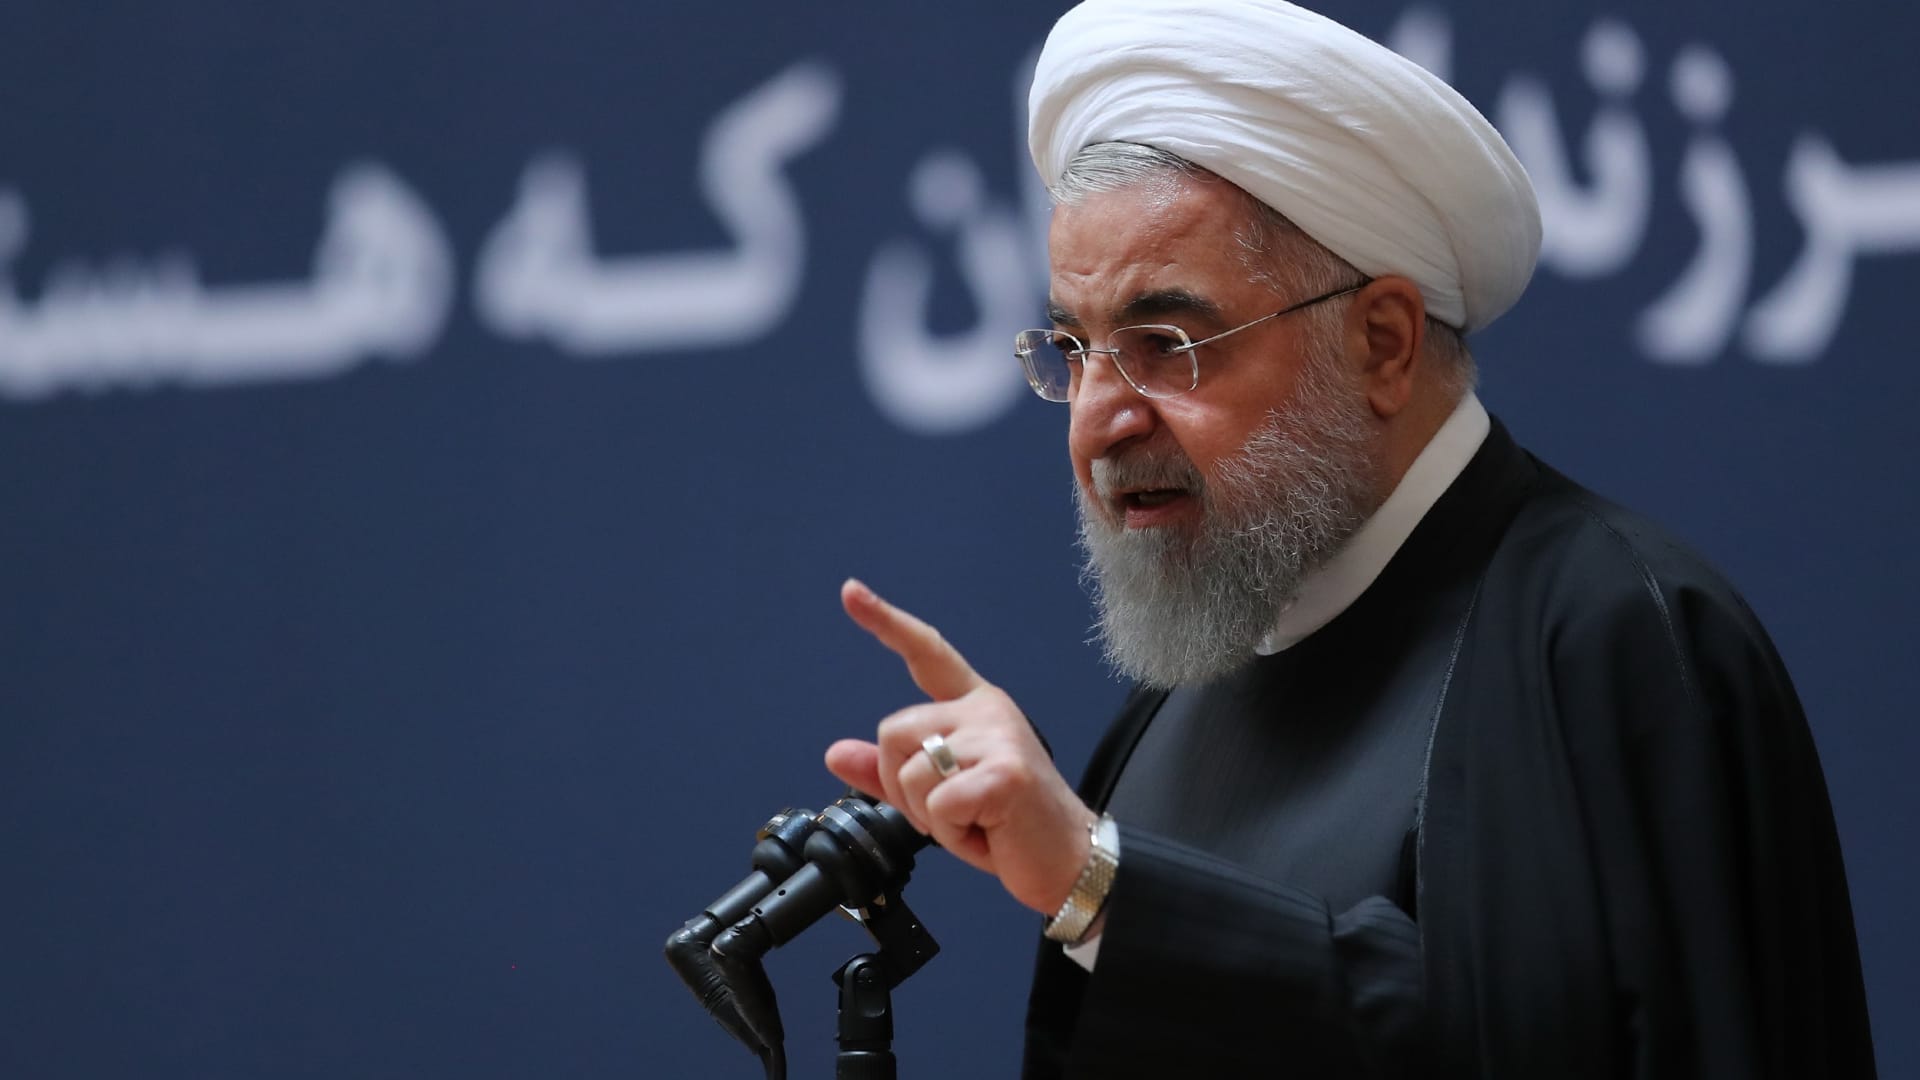 Iranian President Hassan Rouhani makes a speech during a ceremony in Tehran, Iran on January 10, 2019.